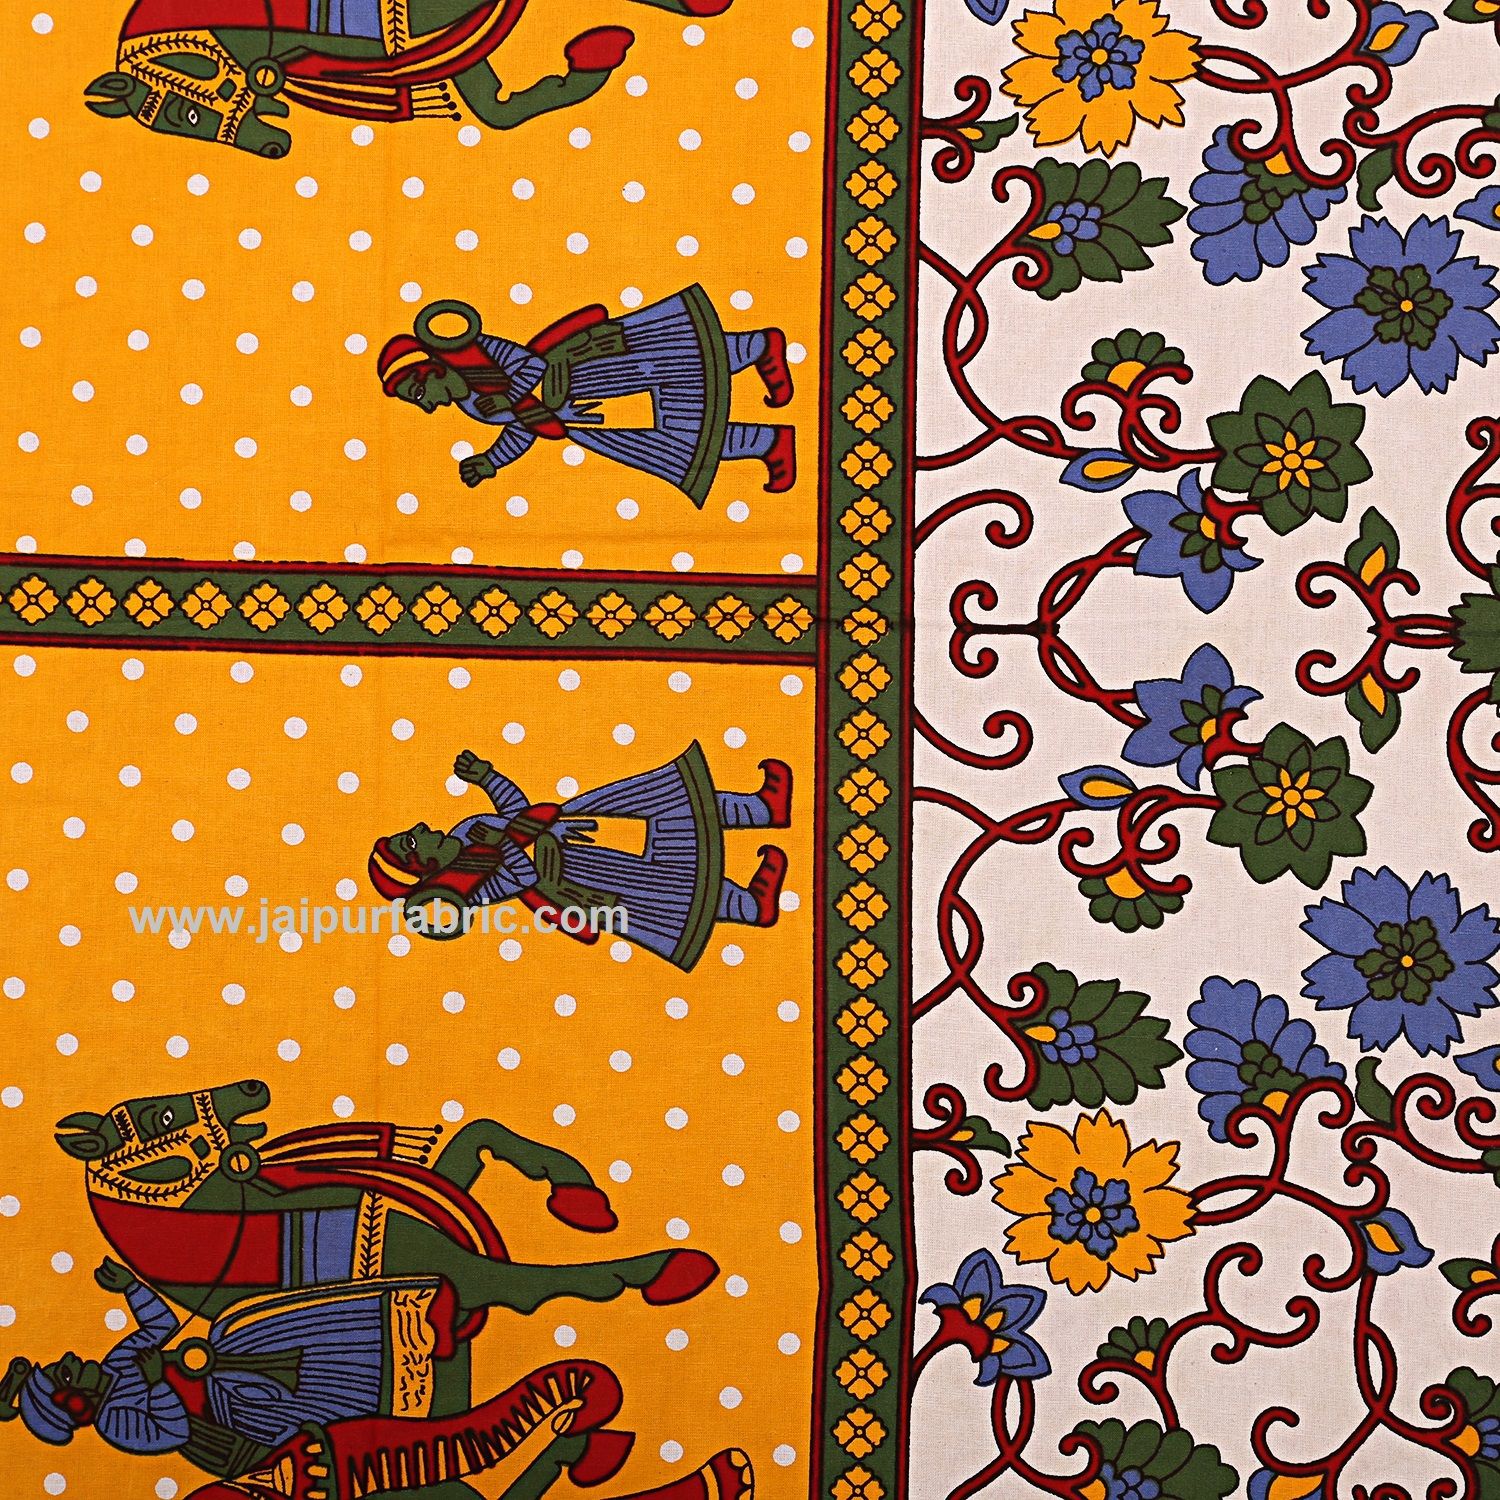 Double Bedsheet Yellow Border Gangaur Print Fine Cotton With Two Pillow Cover